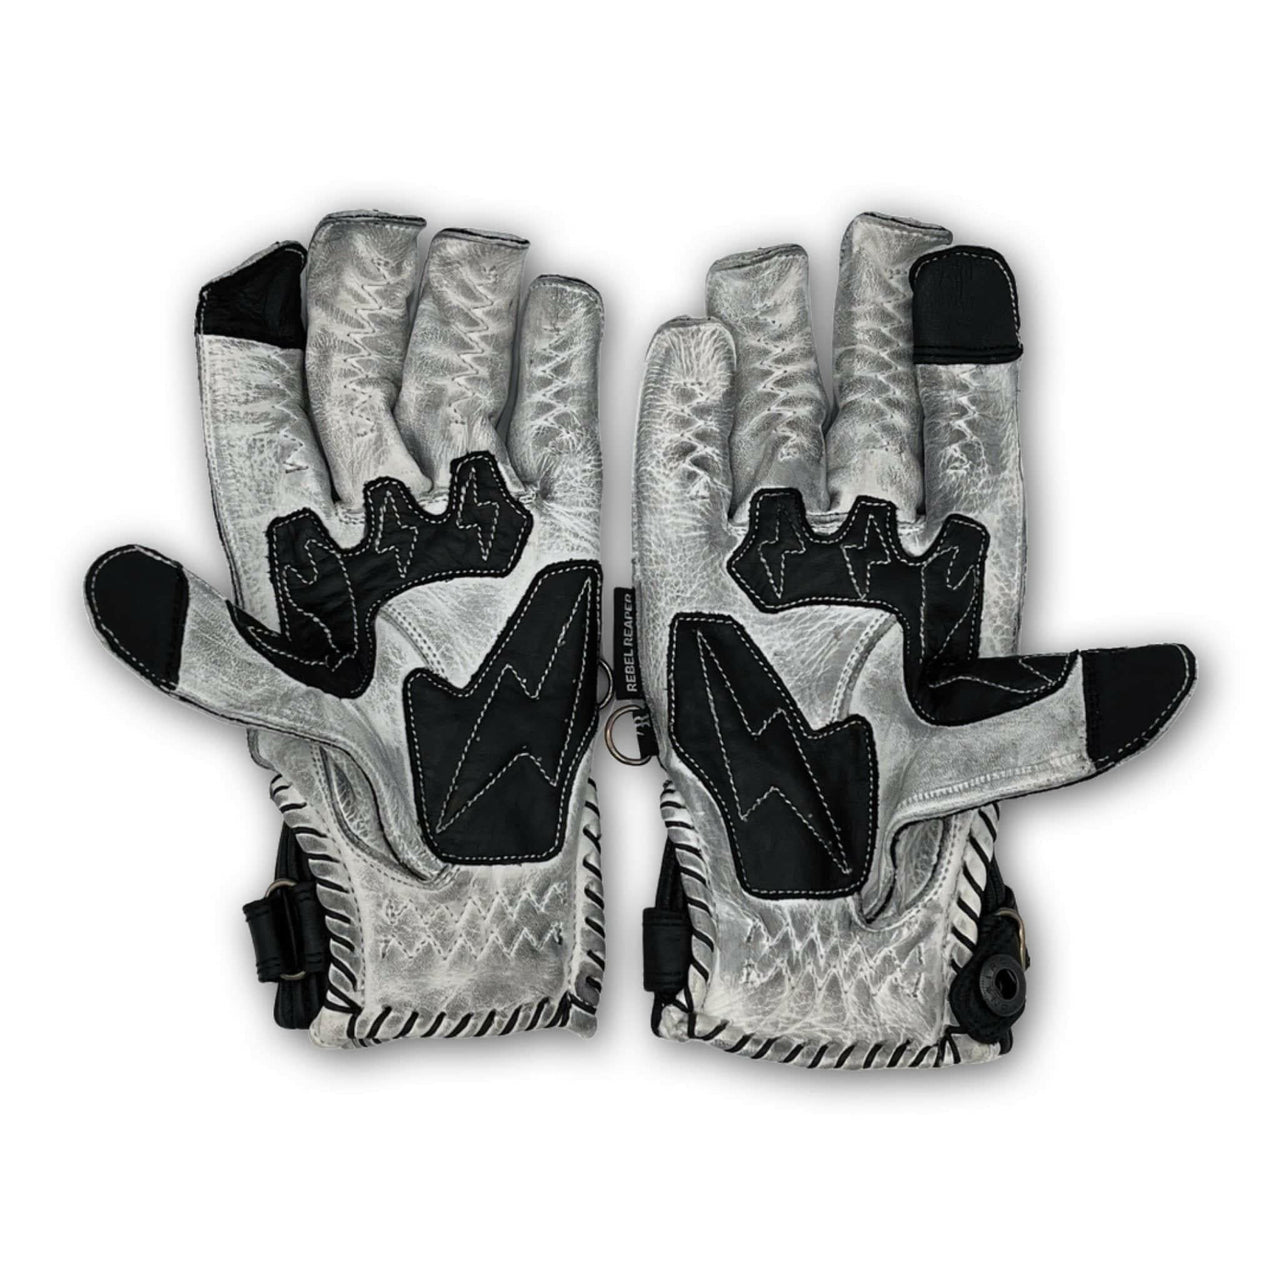 Leather Motorcycle Riding Gloves - Modern Roper - Distressed White - Rebel Reaper Clothing CompanyLeather Gloves